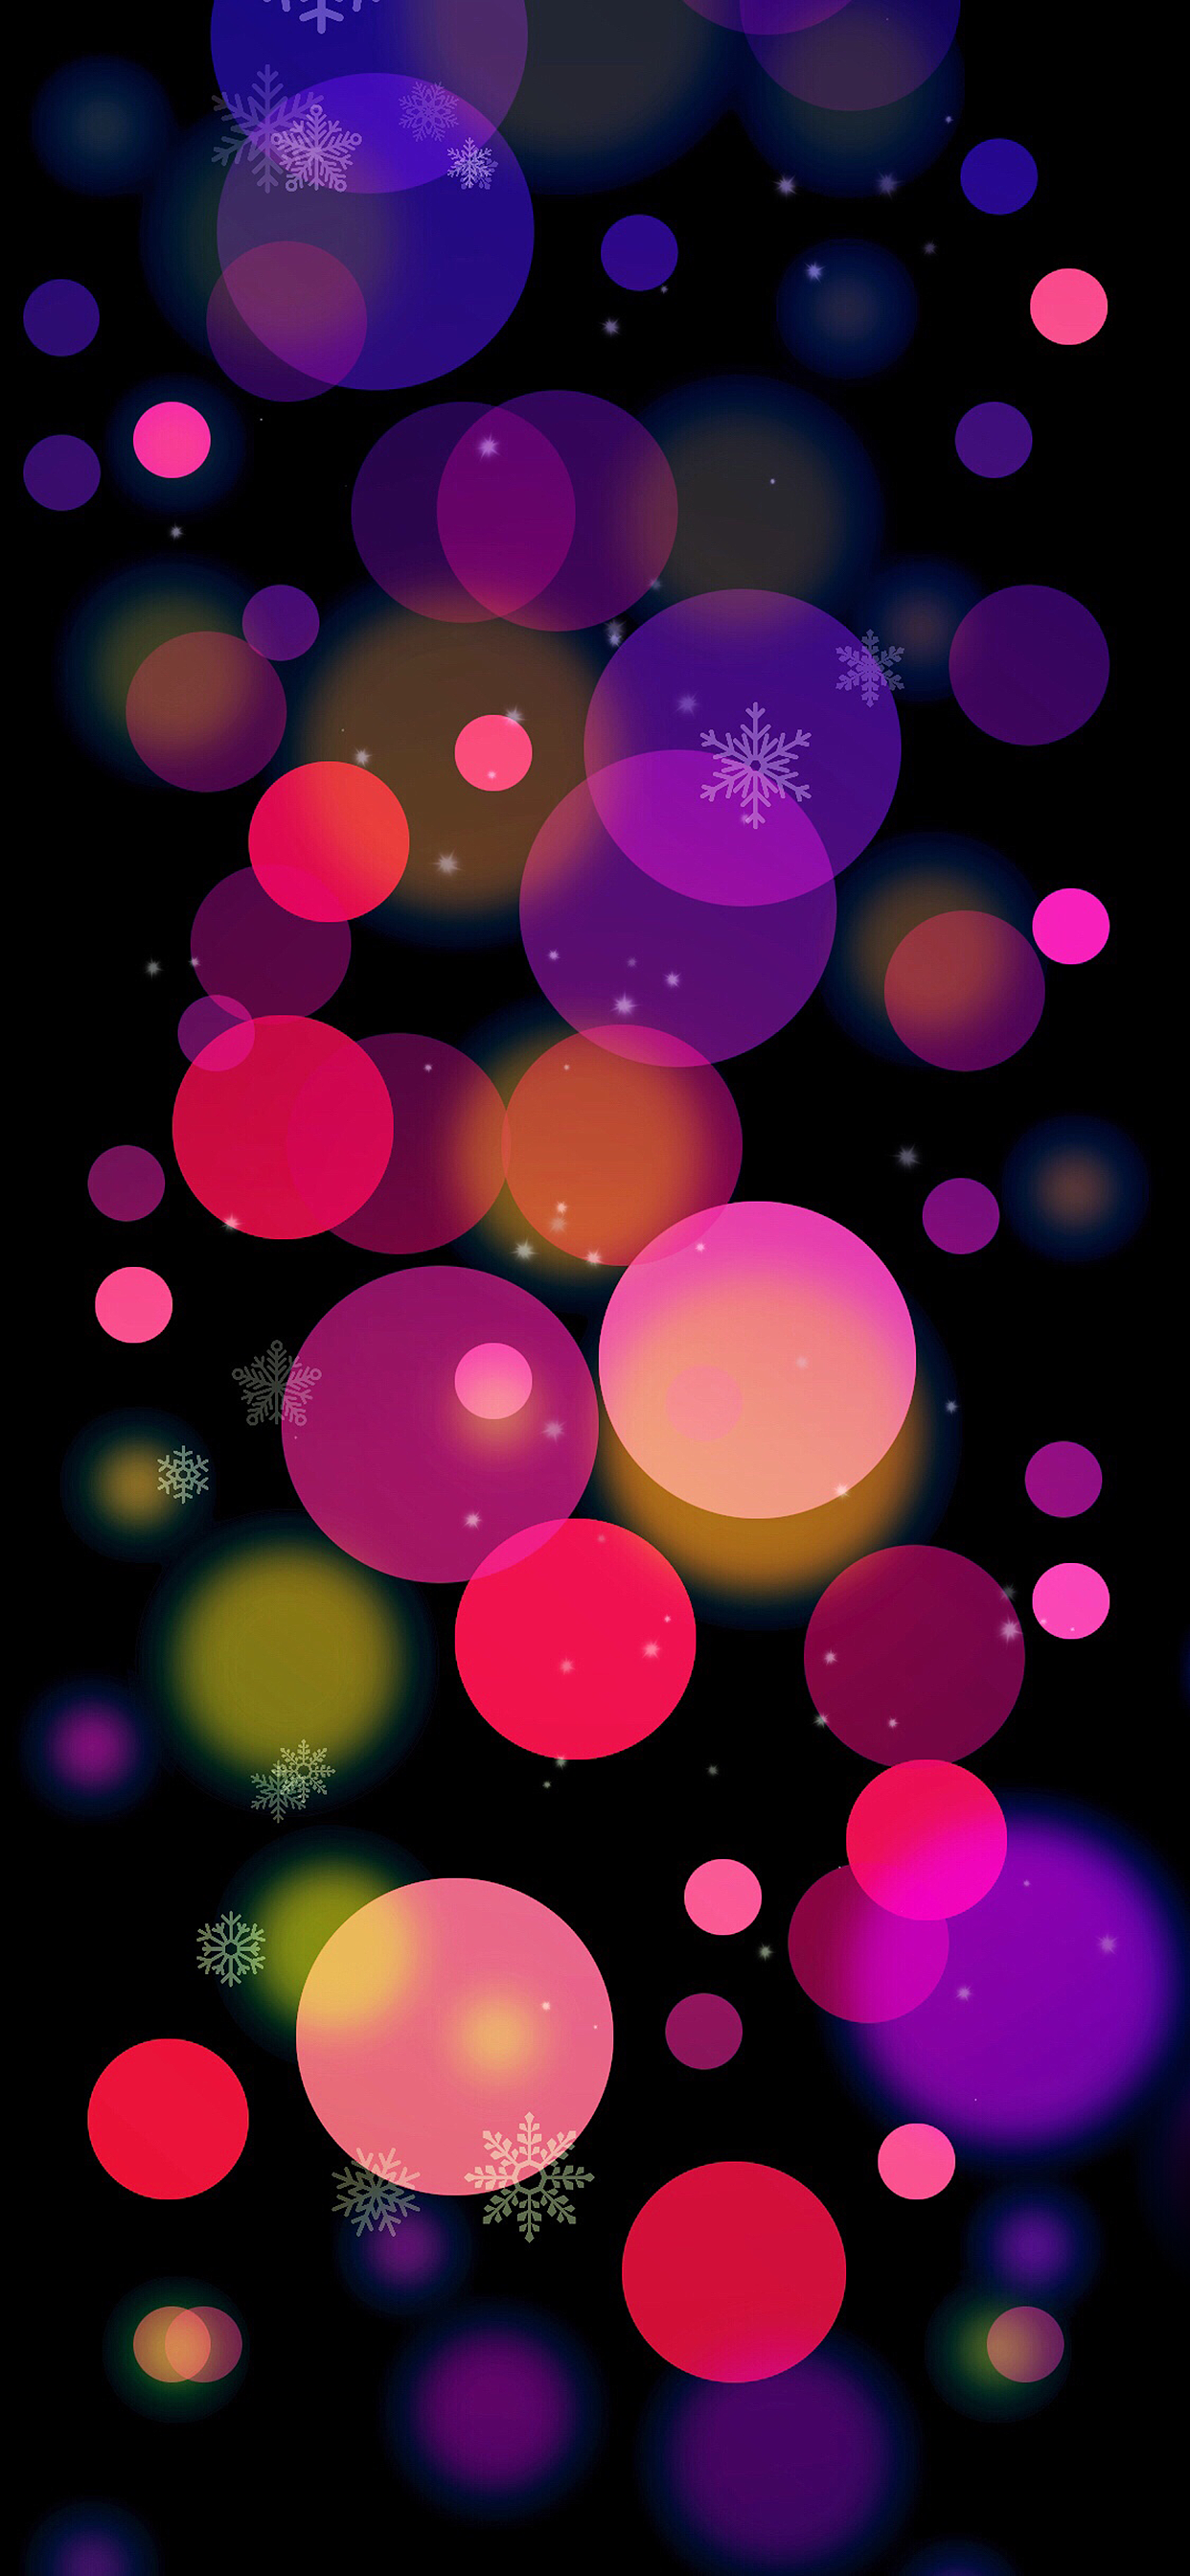 Snowy winter Christmas wallpaper for iPhone